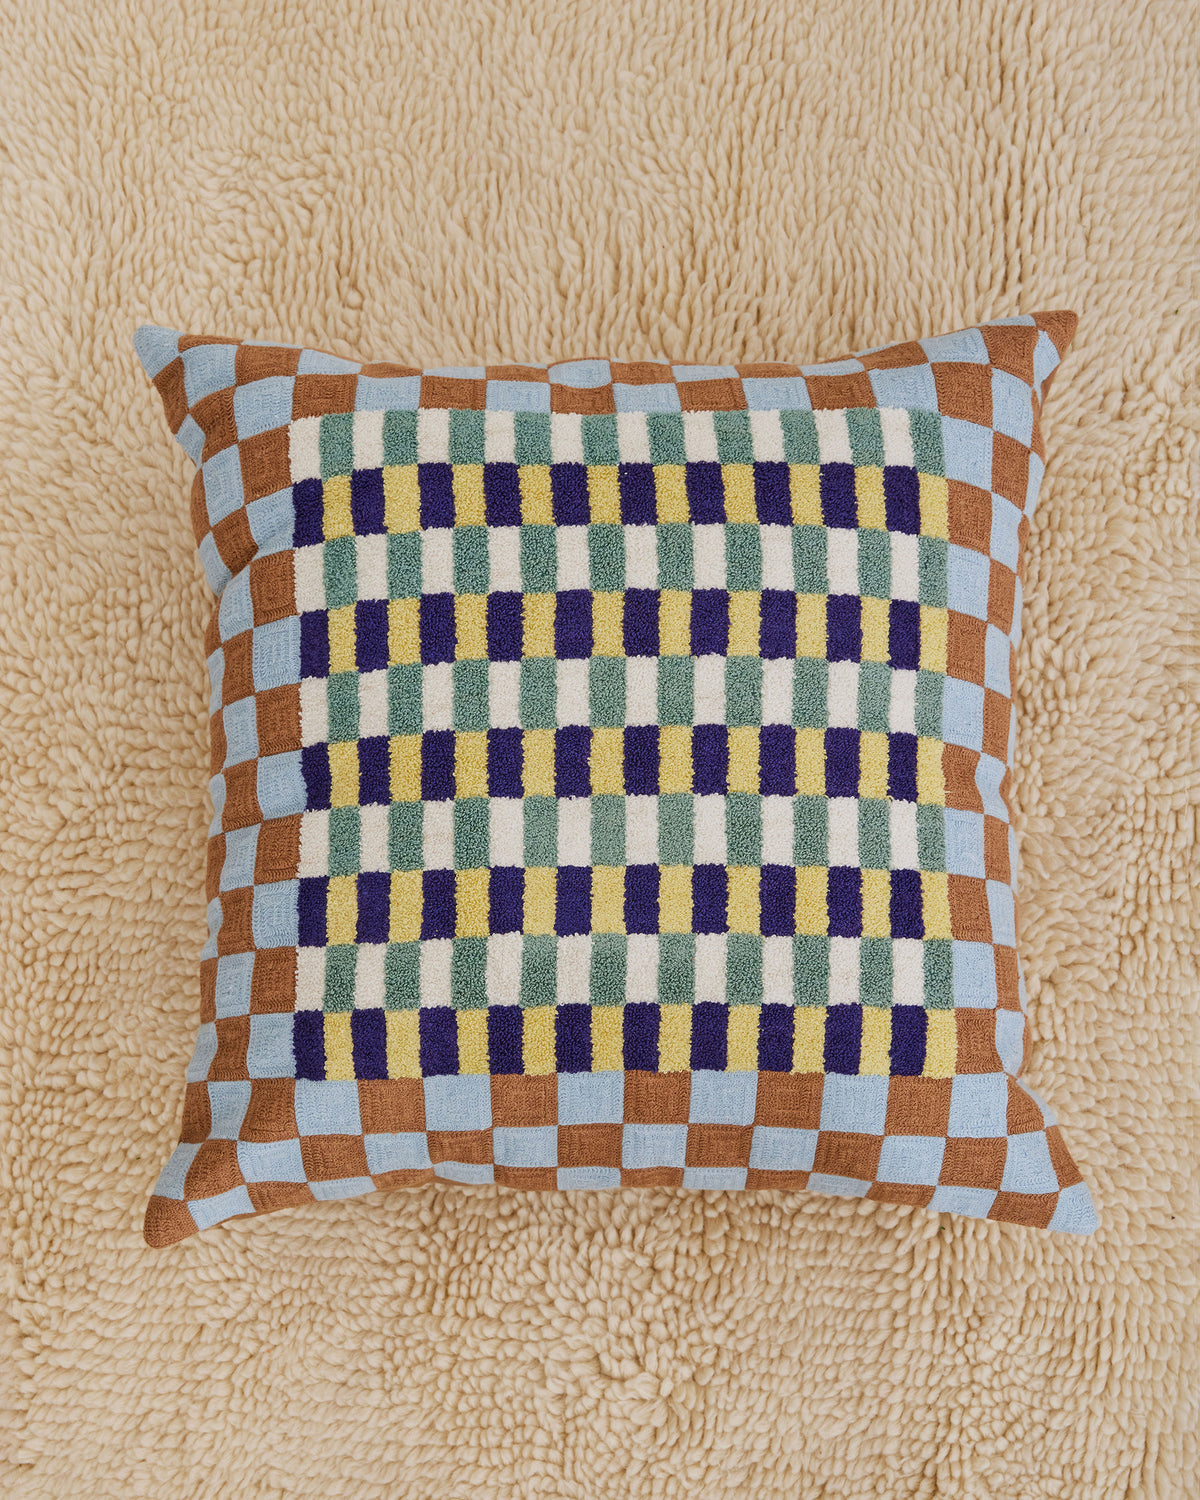 Dusen Dusen Basket Pillow. Basket pillow in multi-color check print. 100% cotton tufted pillow. Natural canvas back with zip closure. Available as 24" x 24". Spot clean only. Made in India.